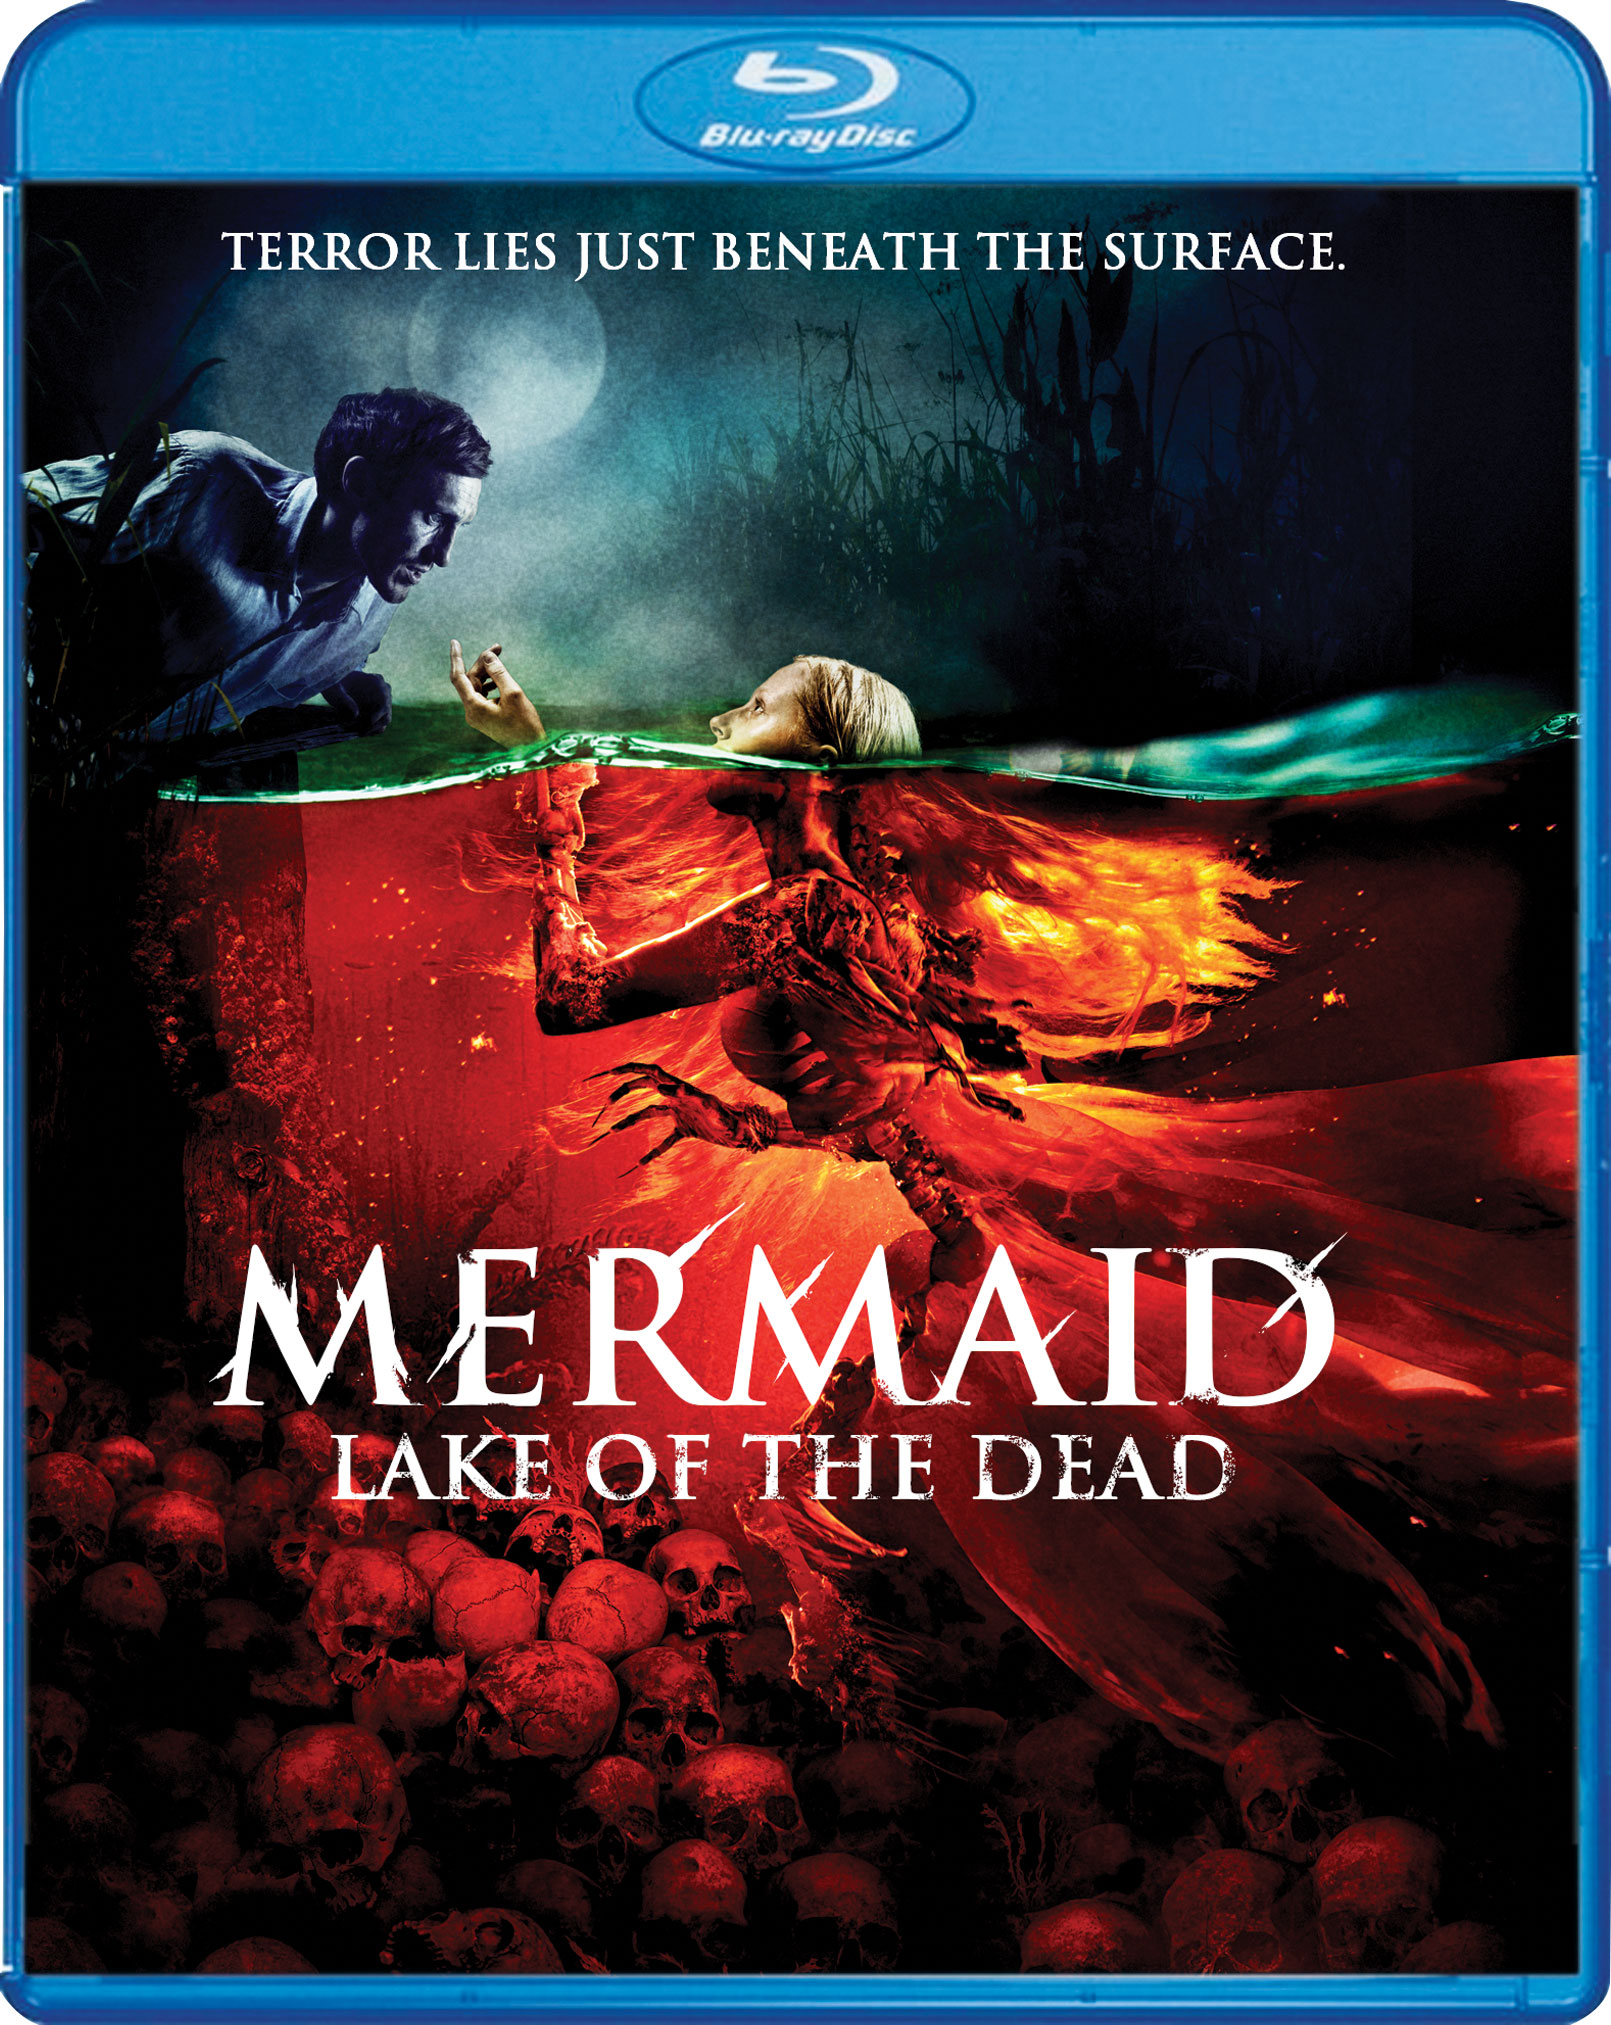 Mermaid: Lake of the Dead Blu-ray Review (Scream Factory